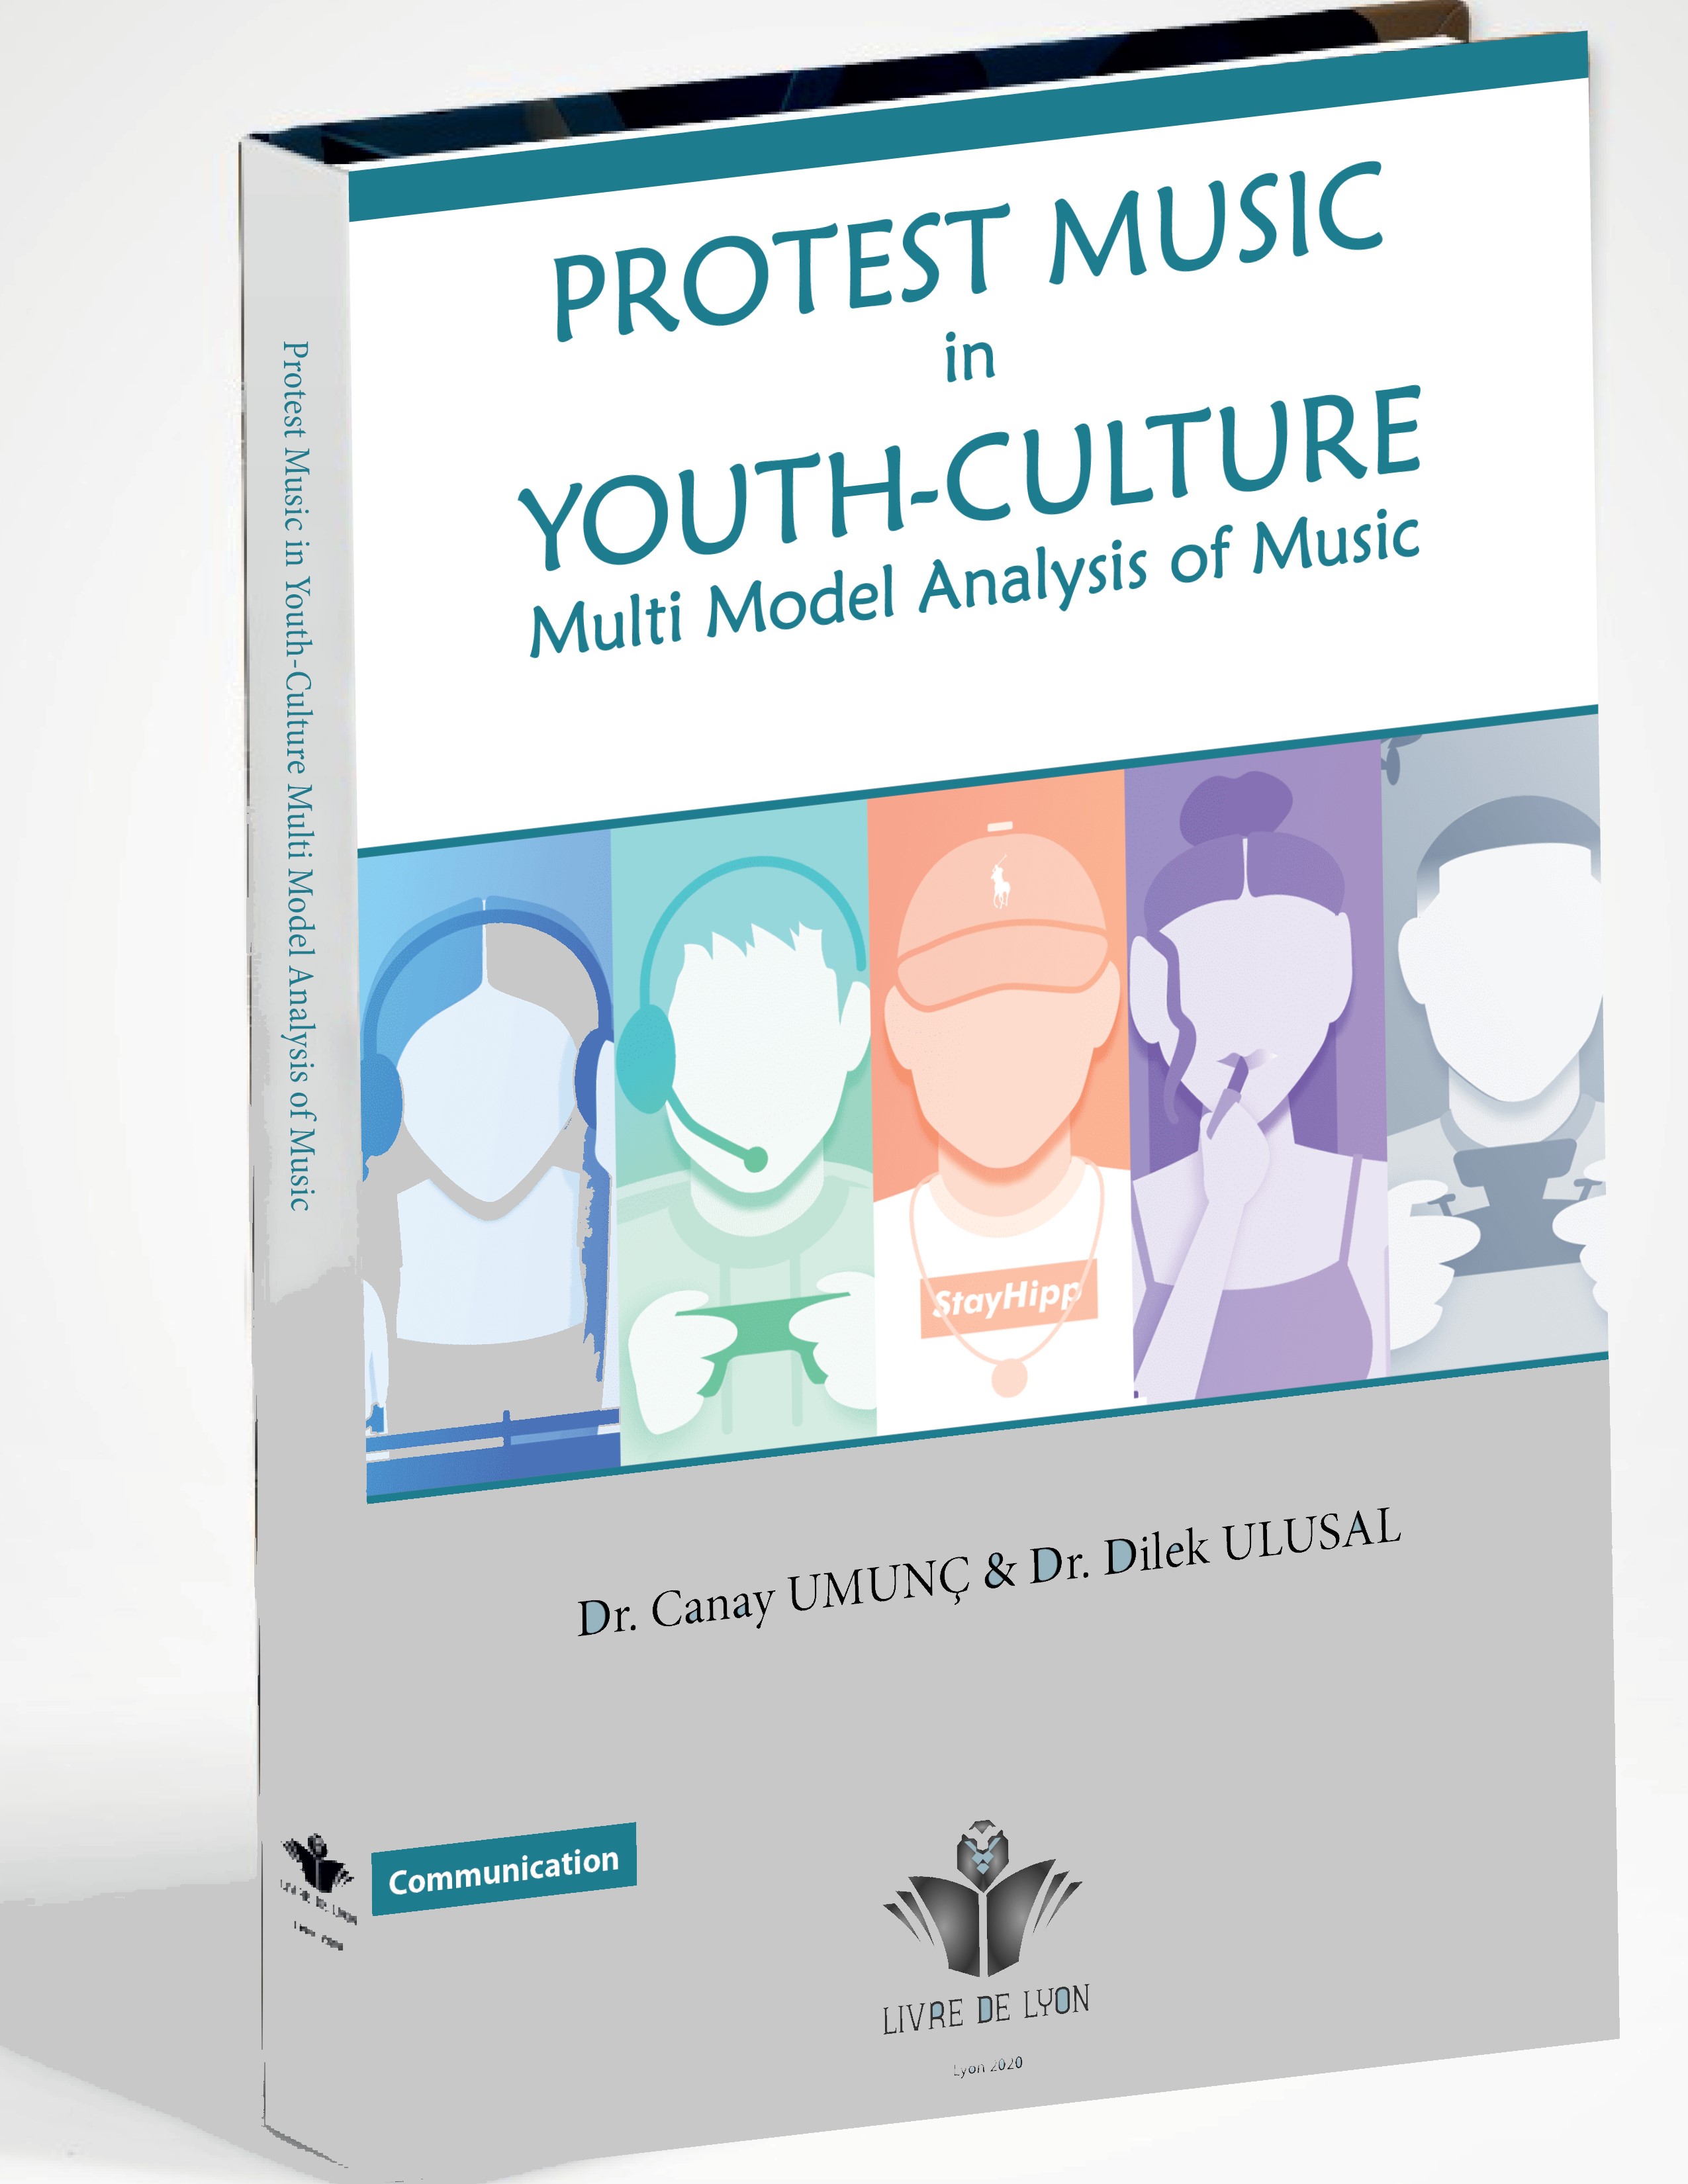 Protest Music in Youth-Culture Multi Model Analysis of Music